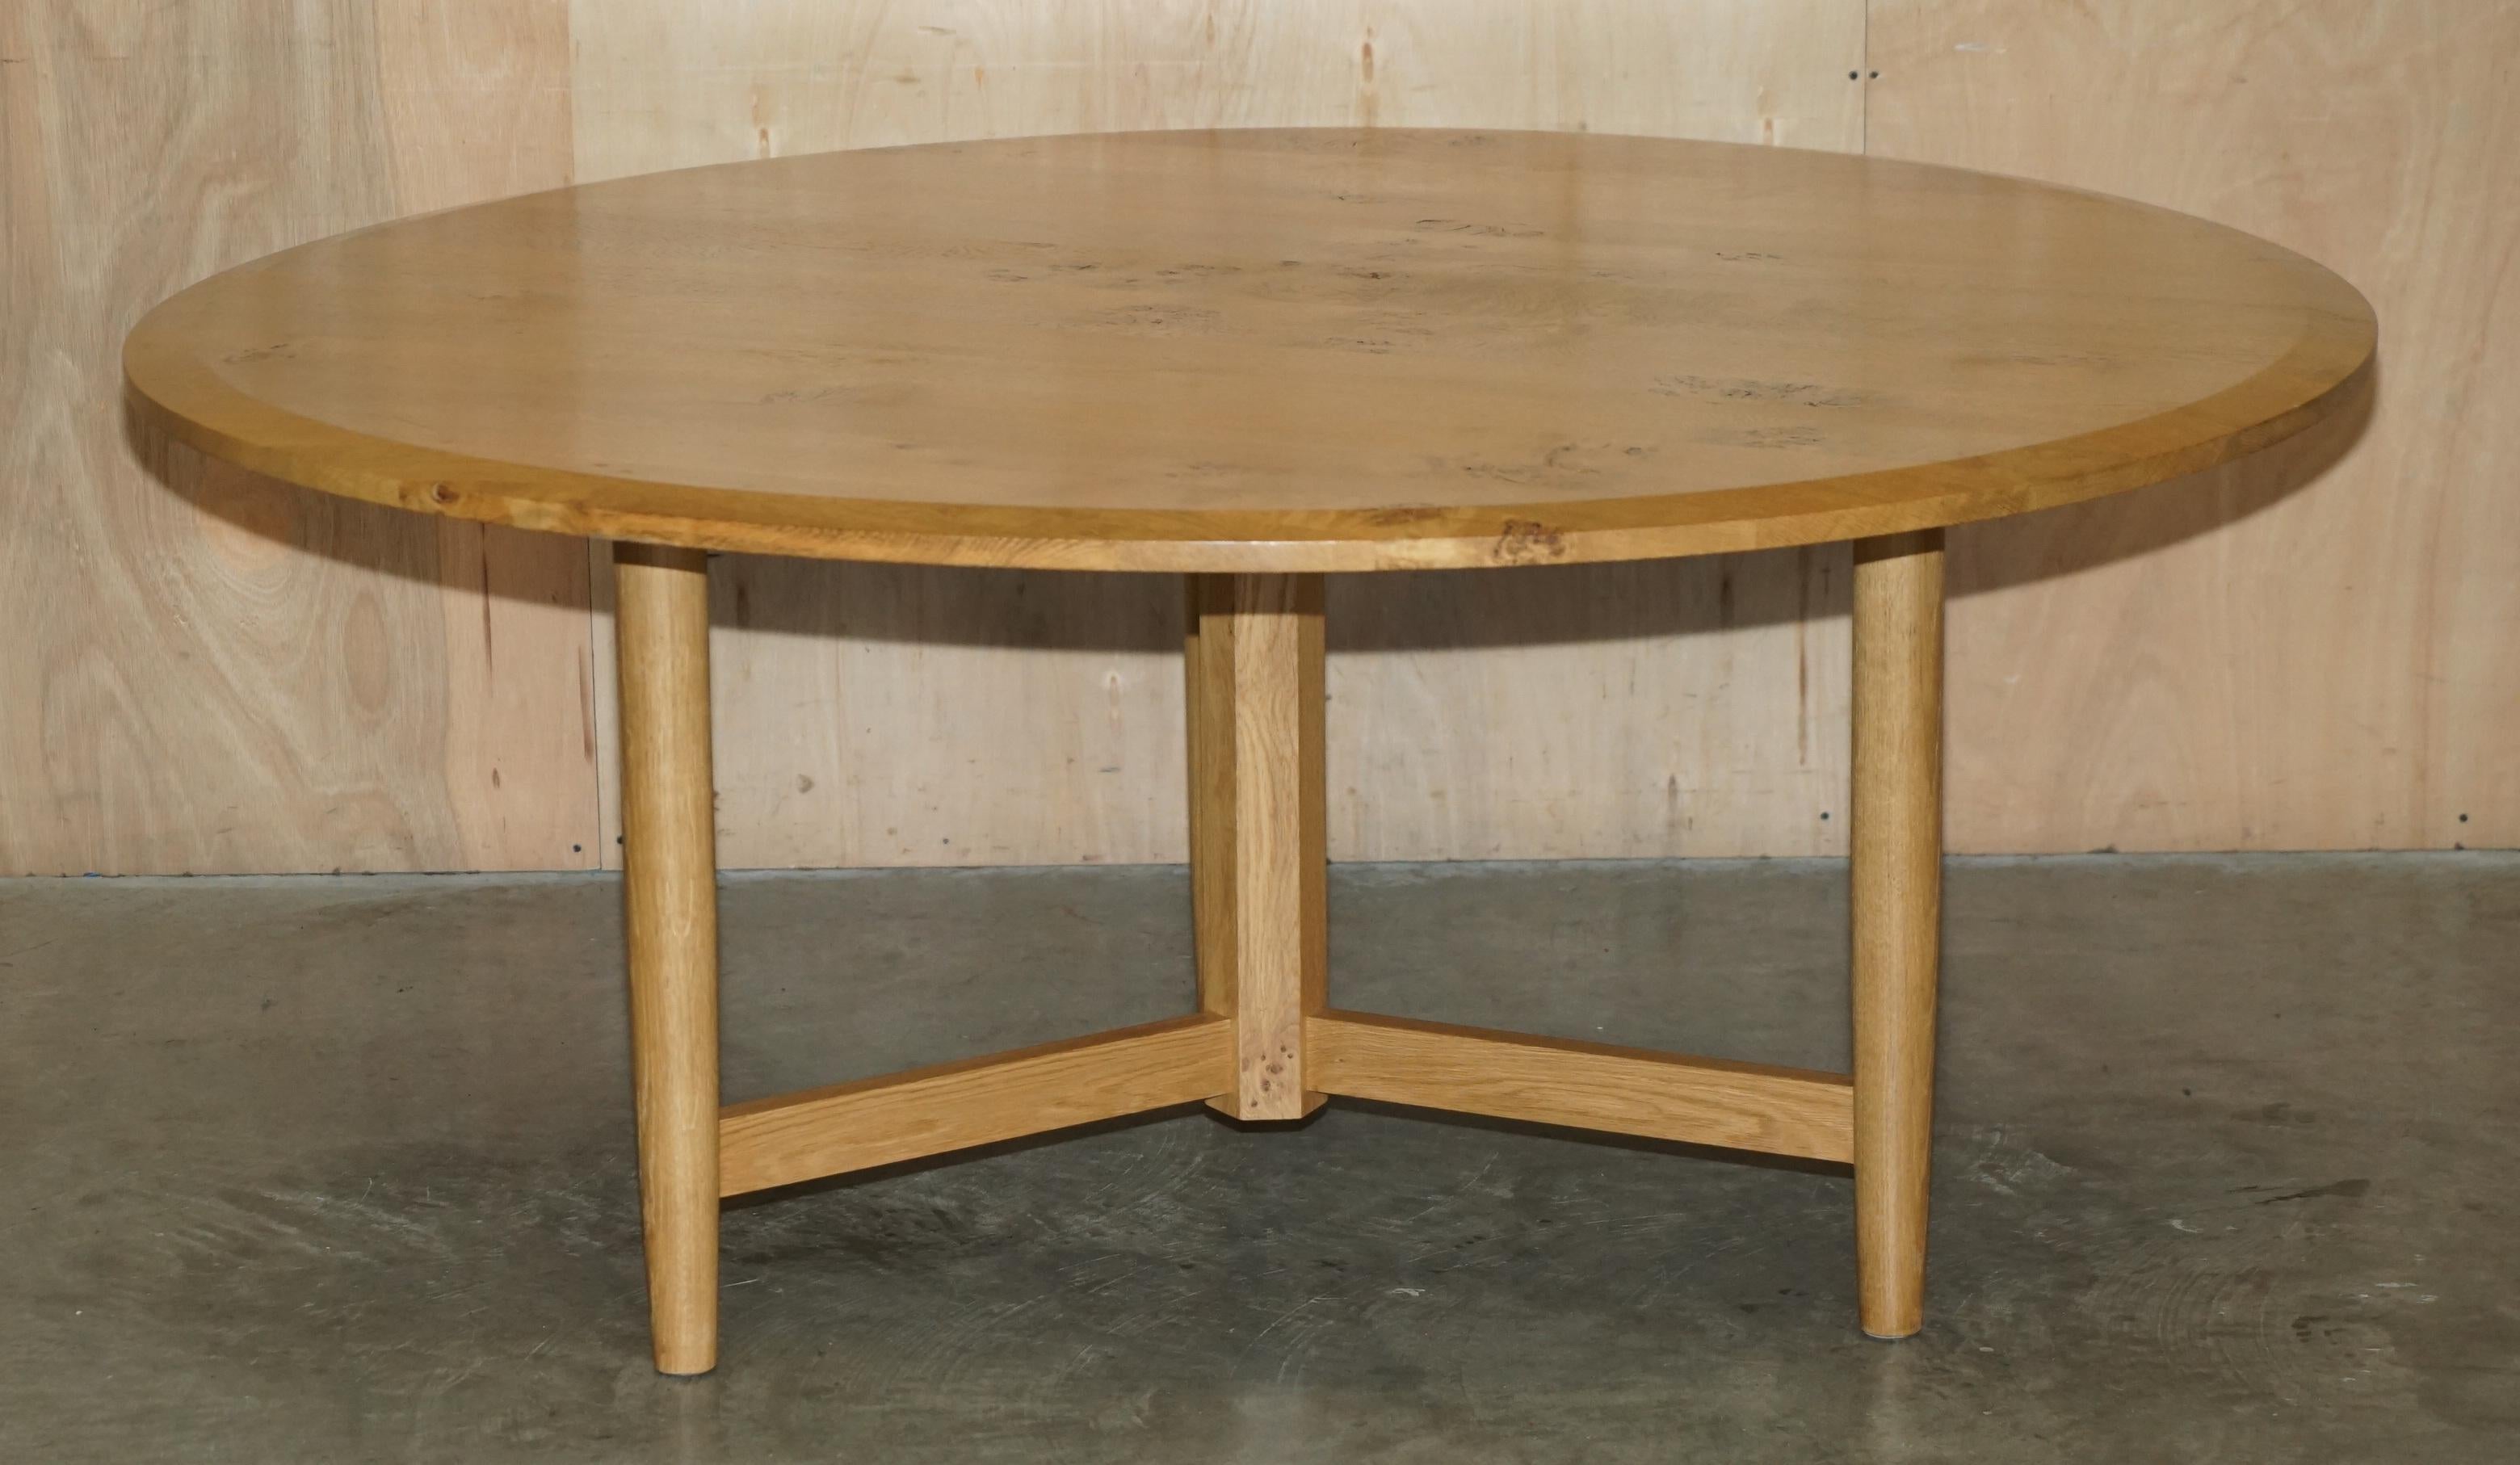 Royal House Antiques

Royal House Antiques is delighted to offer for sale this absolutely exquisite, 6-8 person Pollard, Pippy, Burr Oak round dining table with triform base 

Please note the delivery fee listed is just a guide, it covers within the